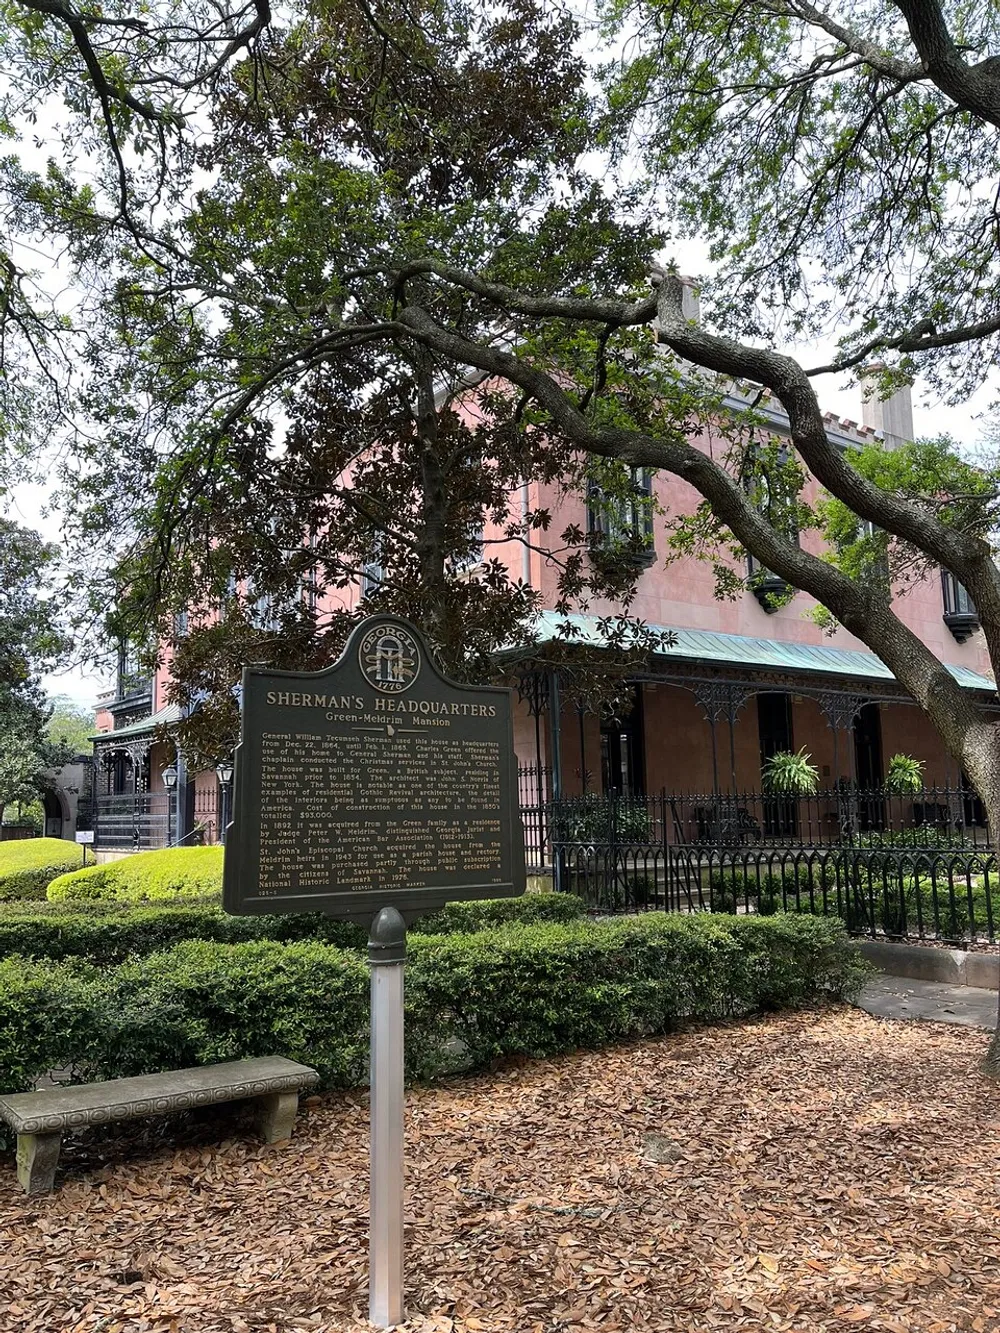 The image shows a historical marker indicating Shermans Headquarters in front of a large pink building surrounded by lush greenery and a sprawling live oak tree suggesting a site of historical significance